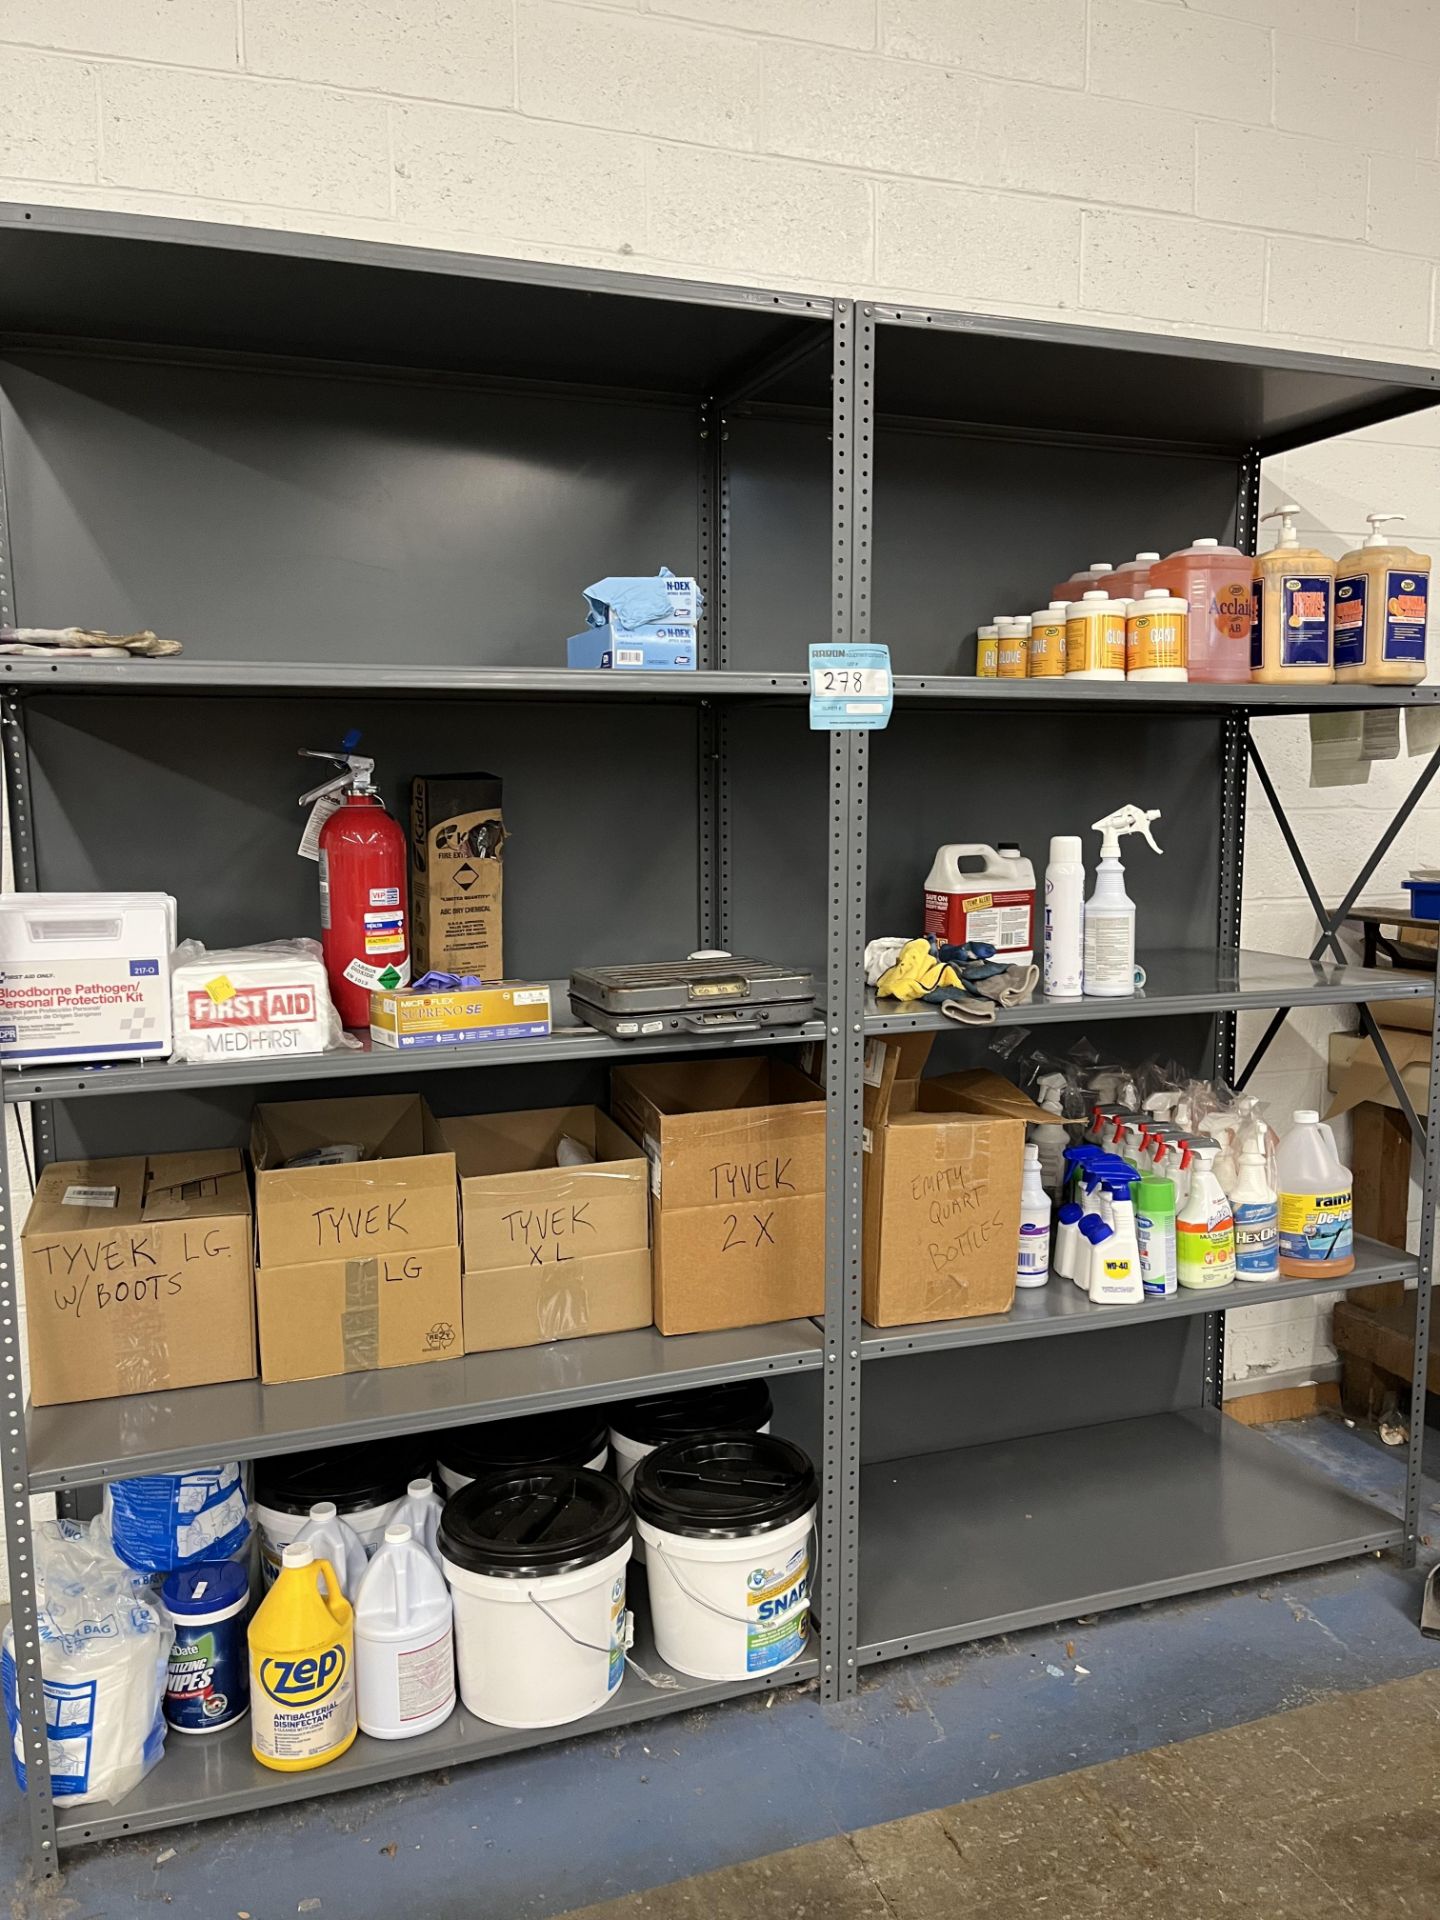 LOT: Rack, Cleaning products, tyvek suit, first aid kits